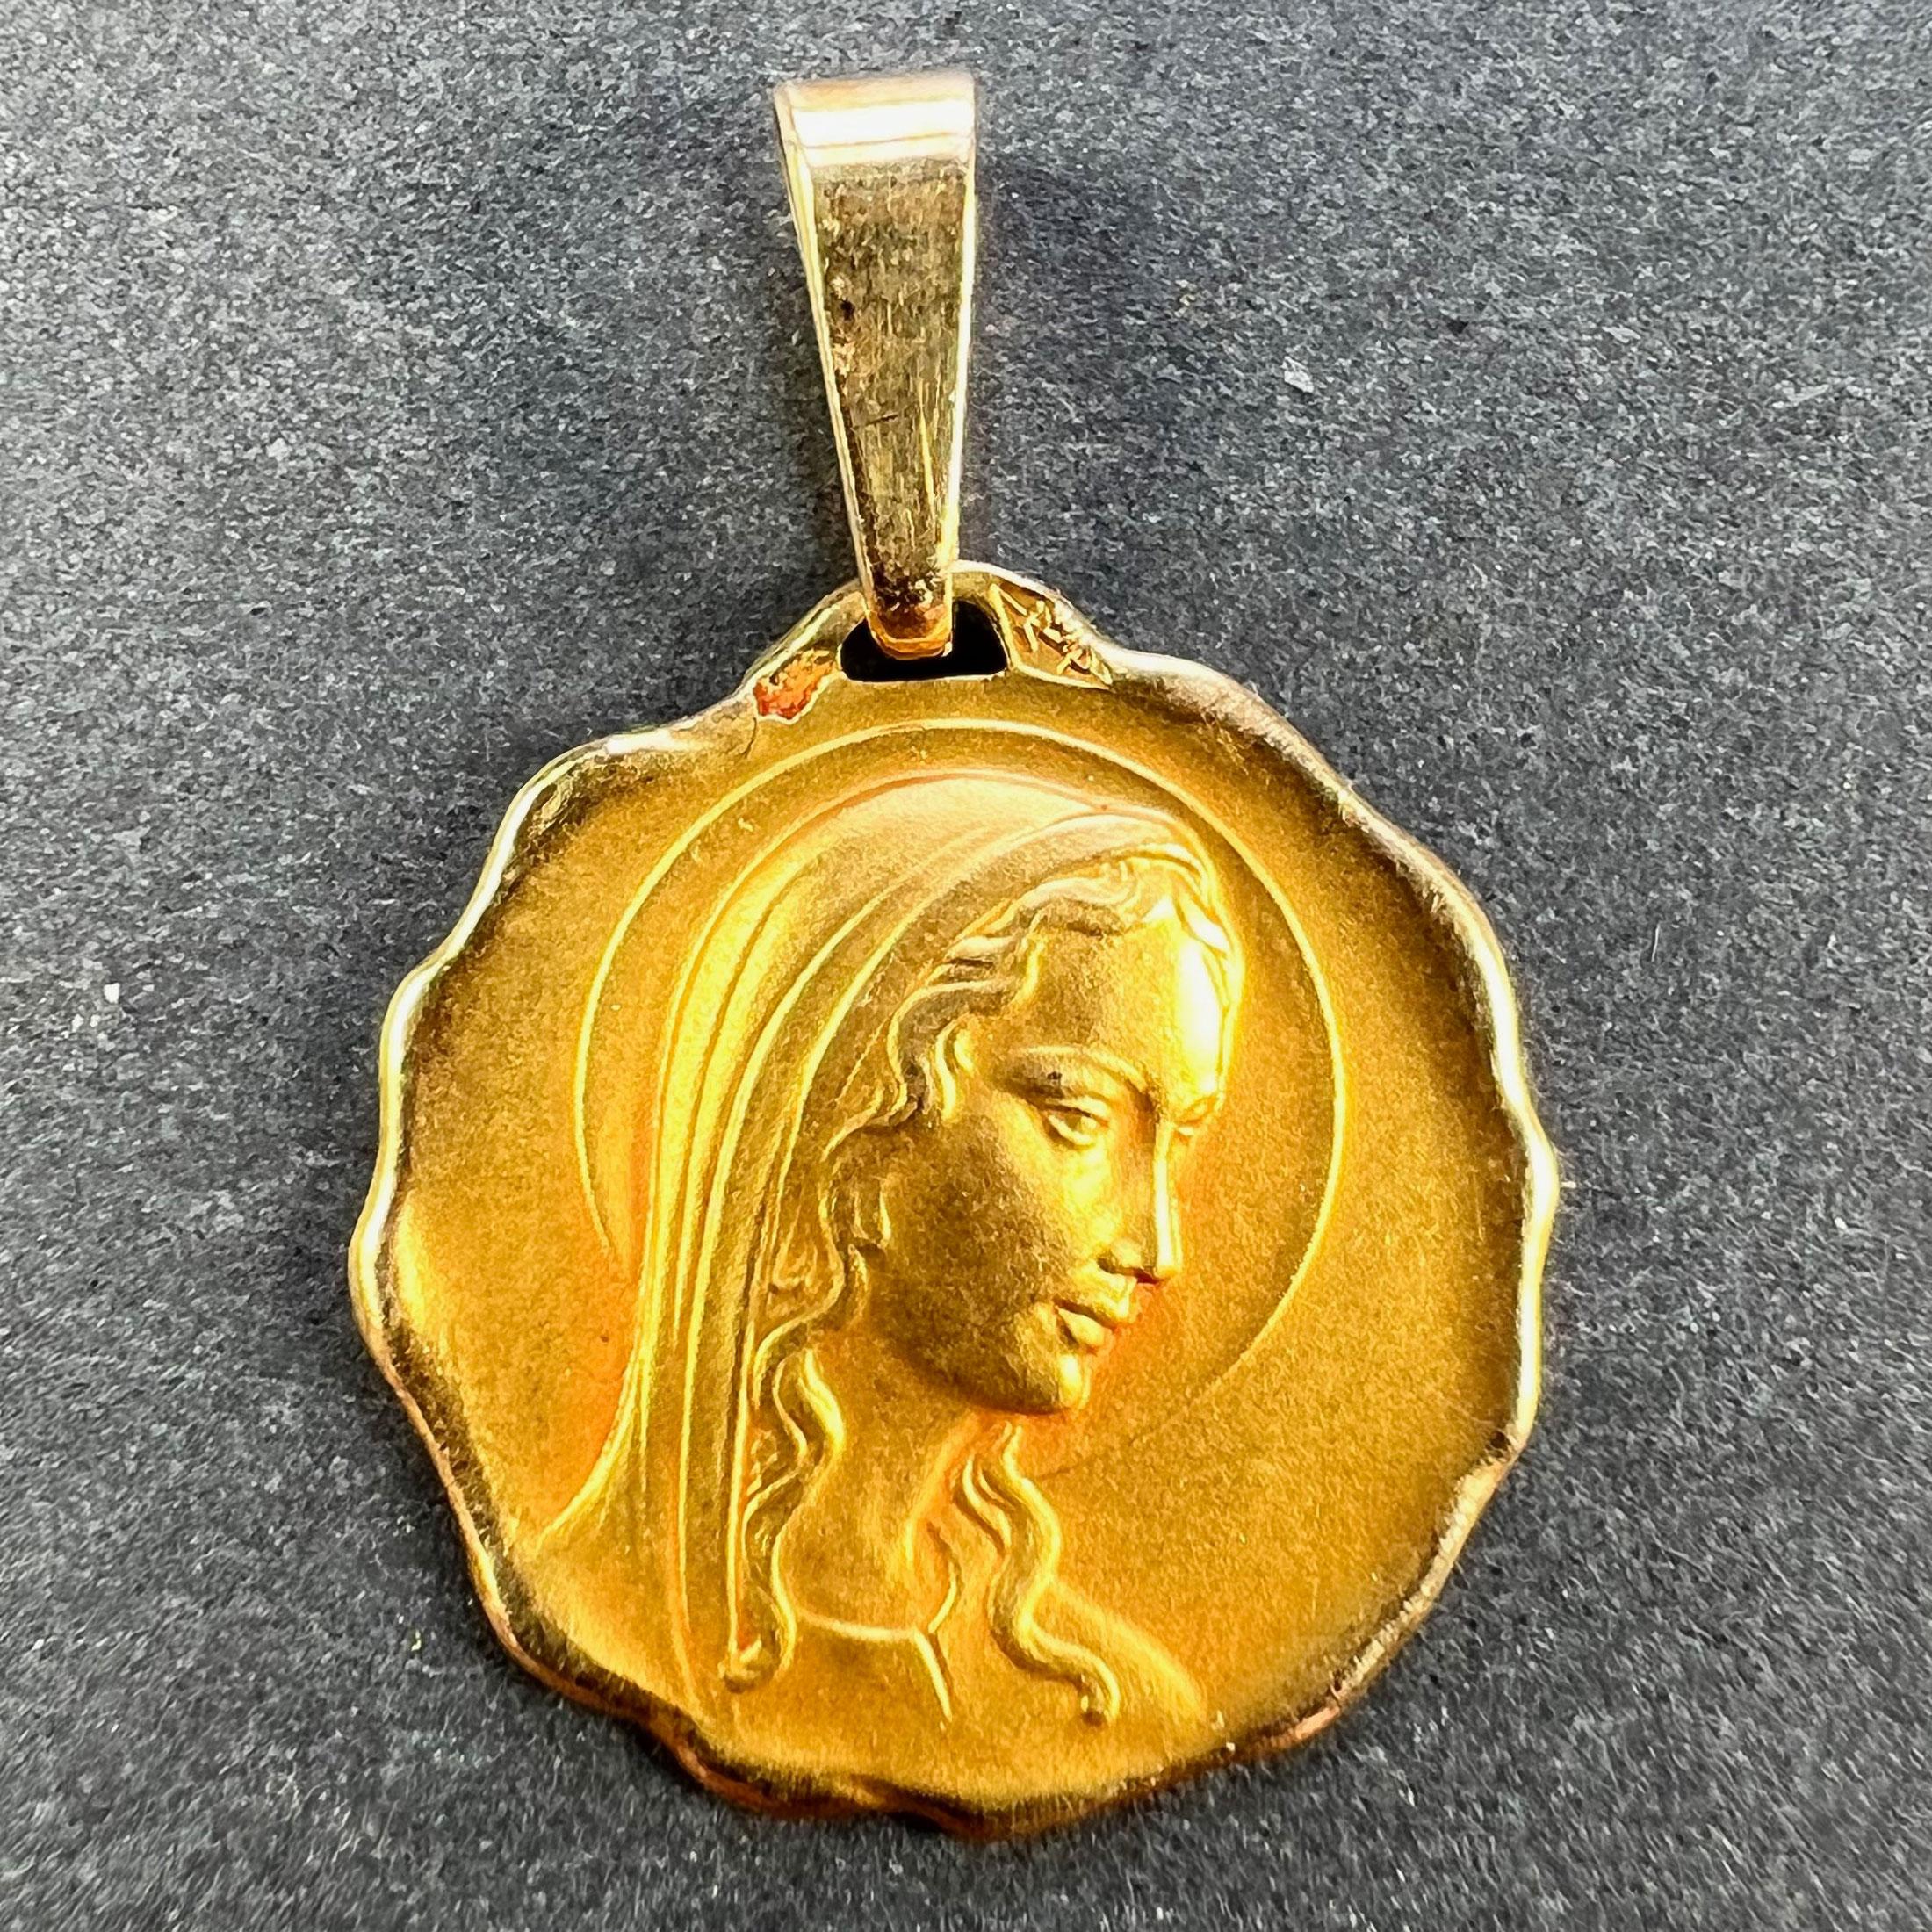 A French 18 karat (18K) yellow gold pendant designed as a round medal depicting the Virgin Mary within a halo and a wavy frame. Stamped with the eagle’s head for French manufacture and 18 karat gold, with an unknown maker’s mark.

Dimensions: 1.6 x